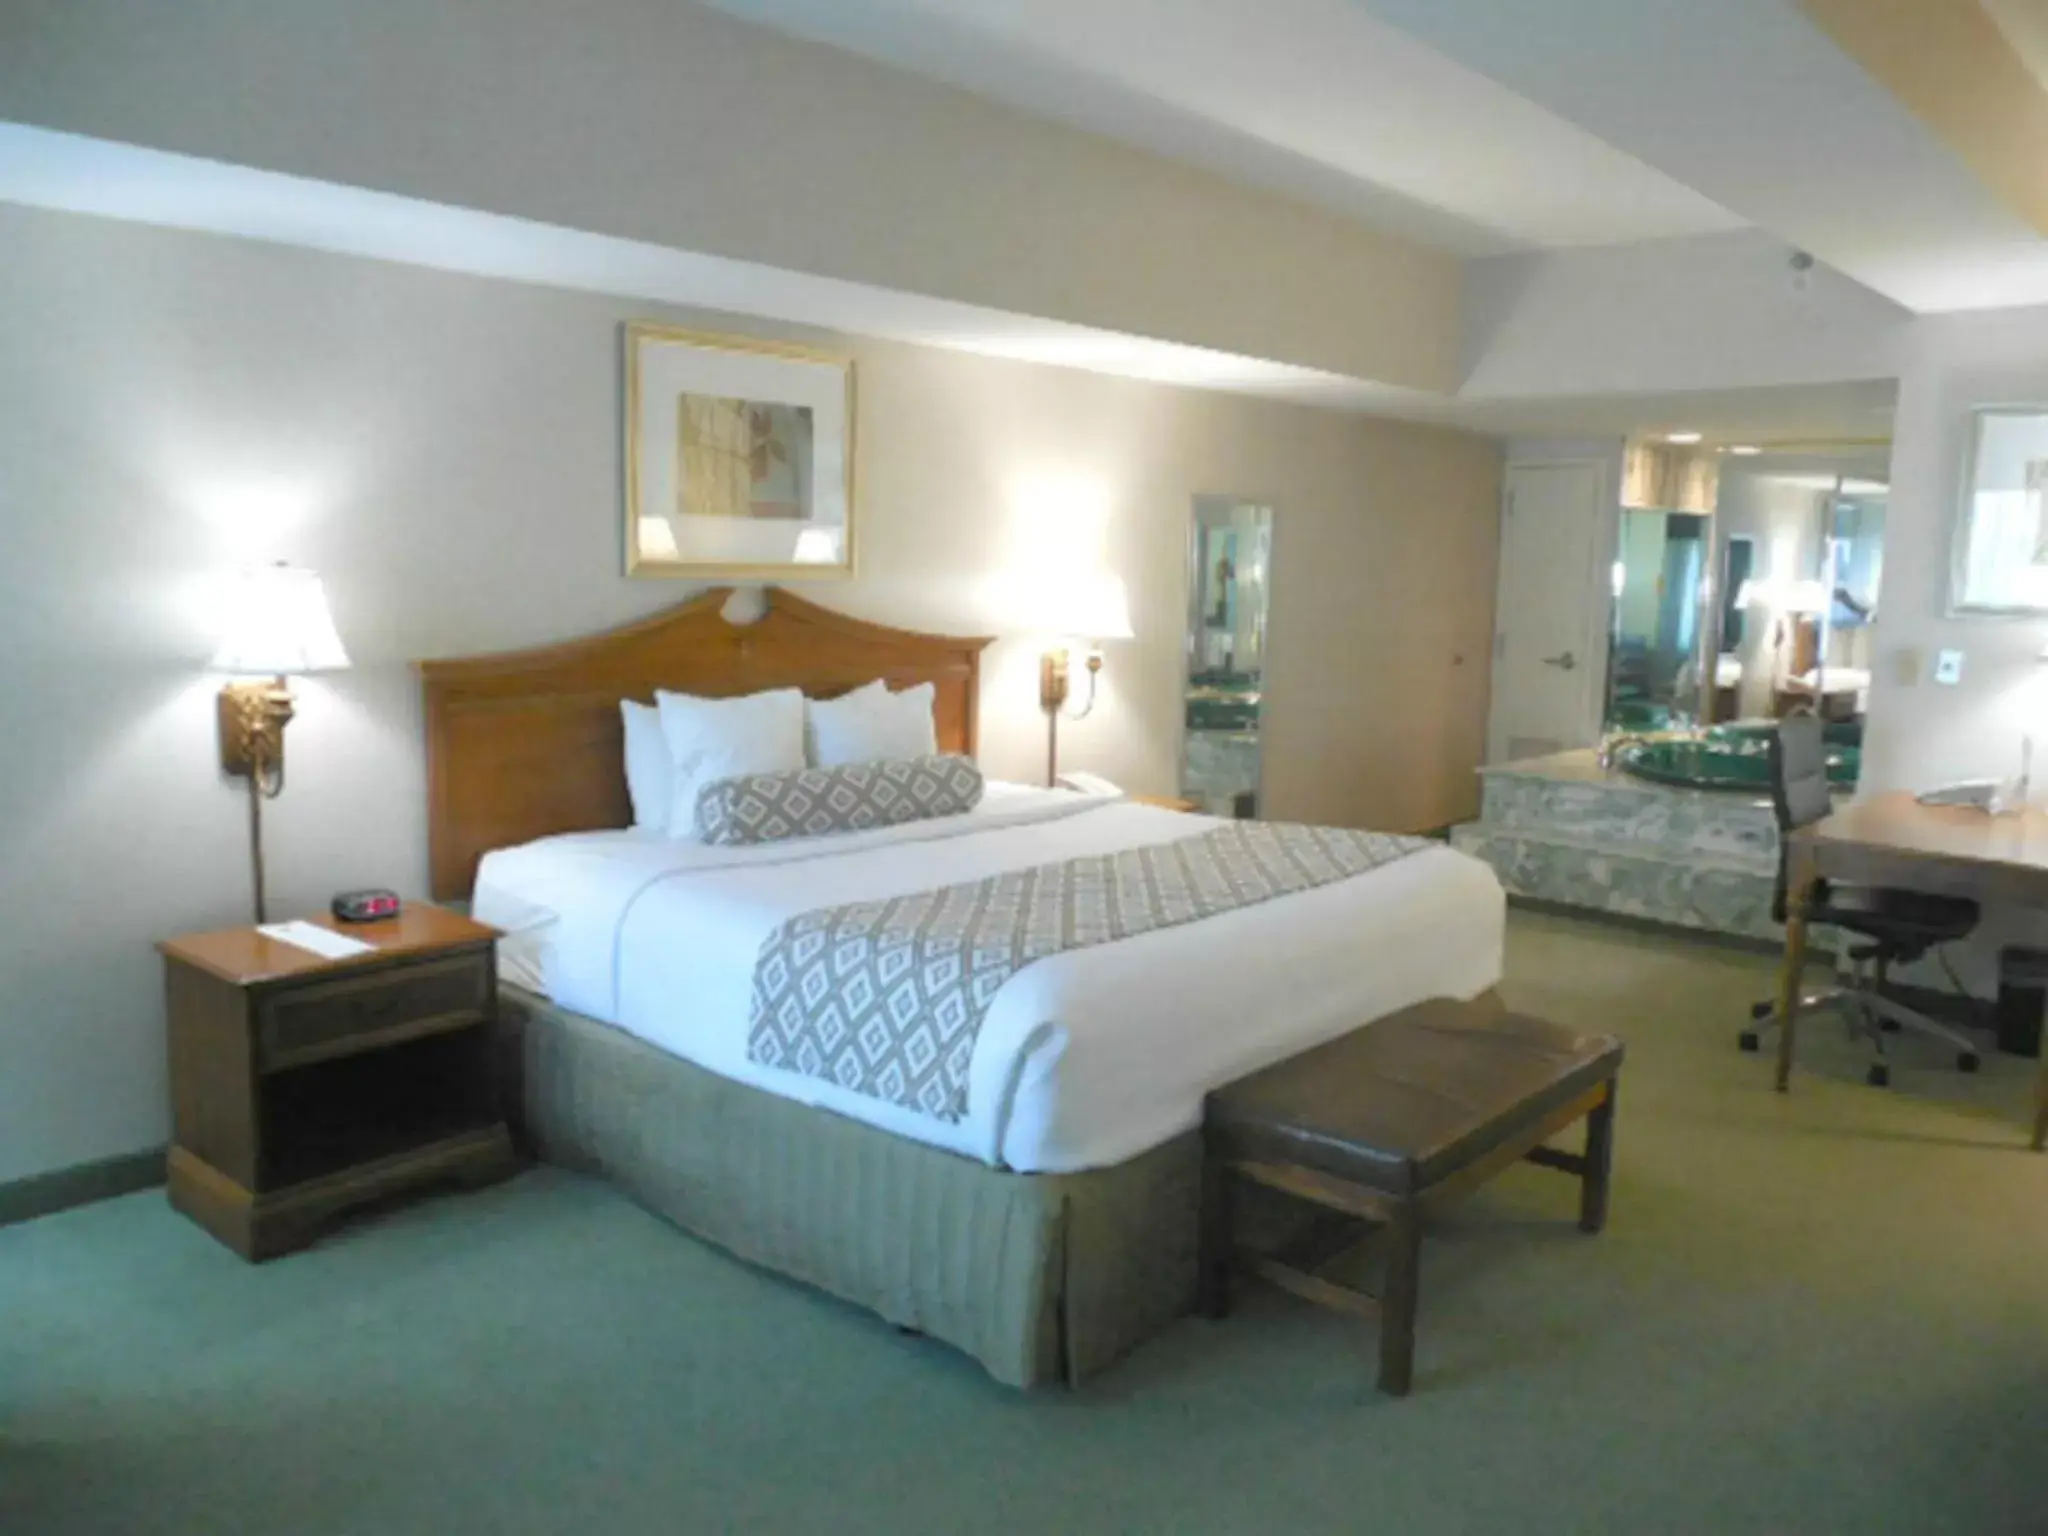 Bed, Room Photo in Clayton Plaza Hotel & Extended Stay